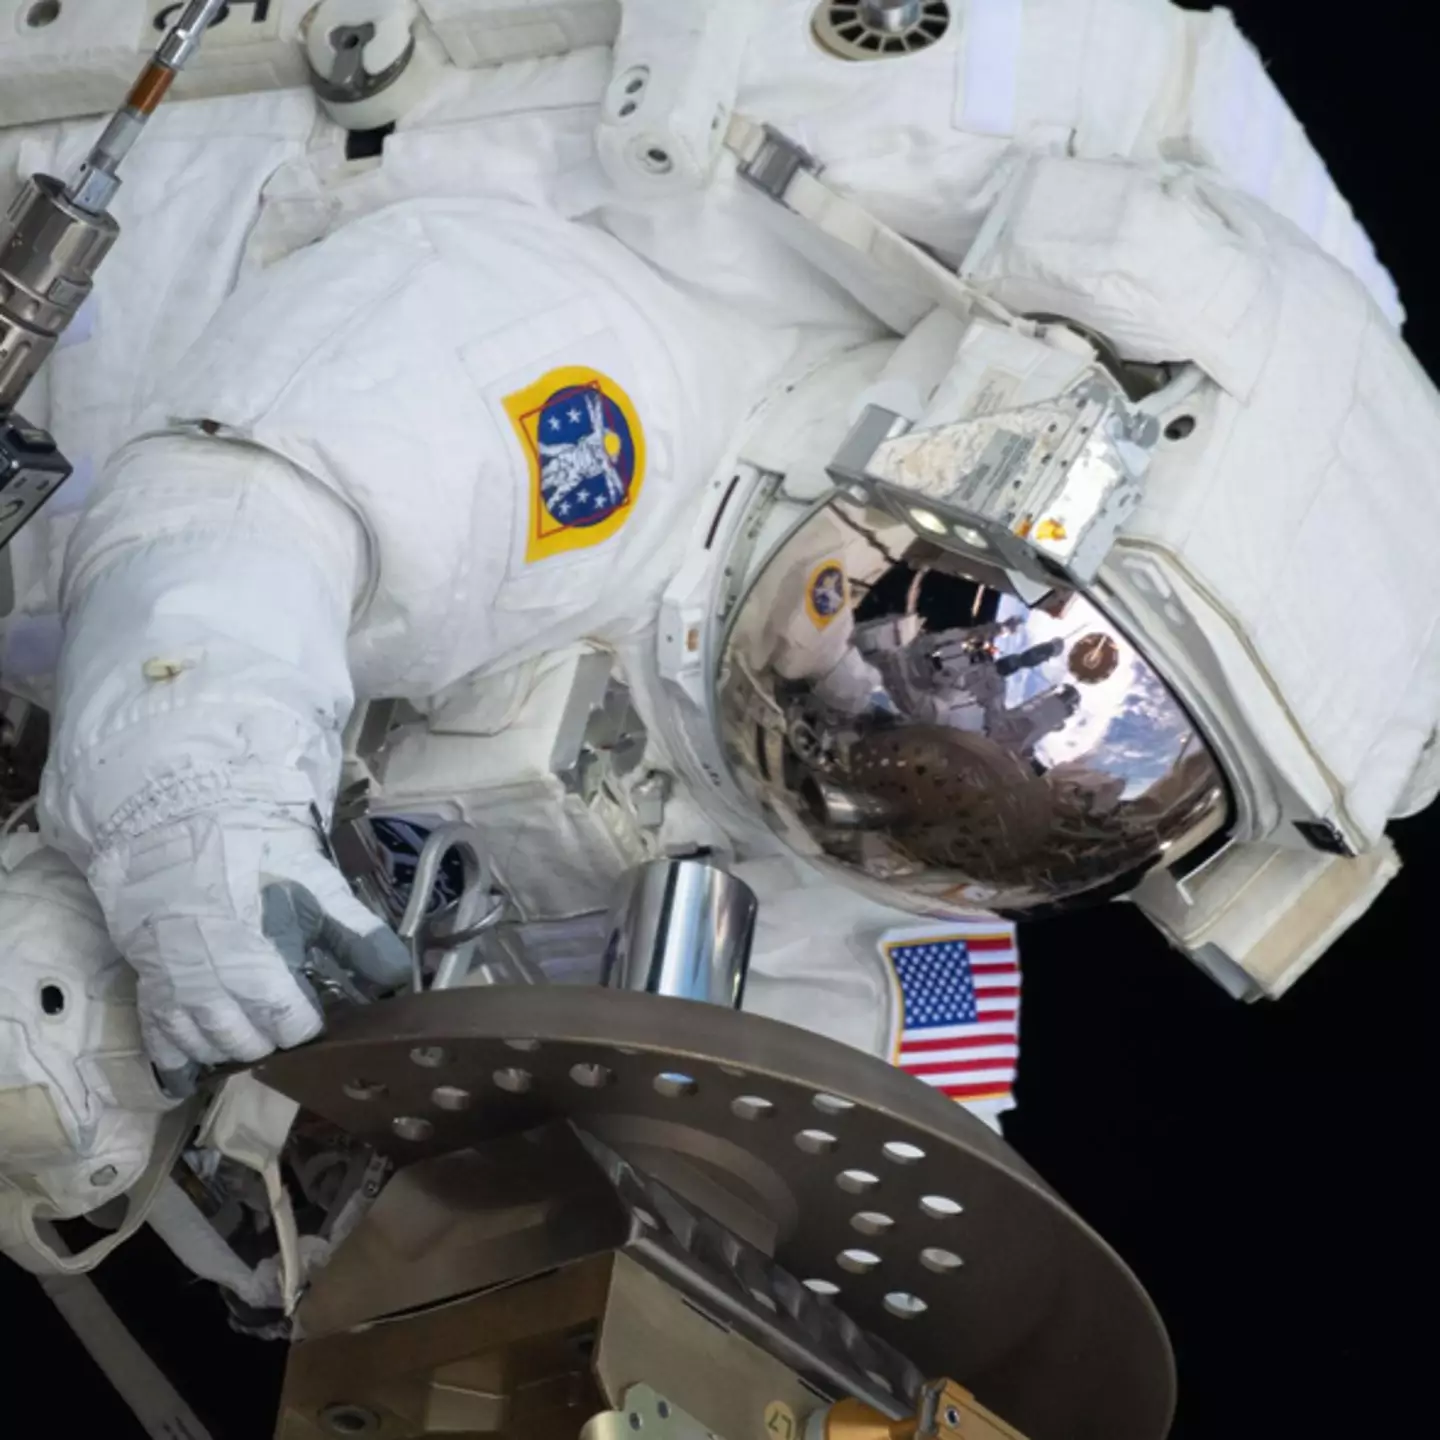 How astronauts are able to control their movements through space